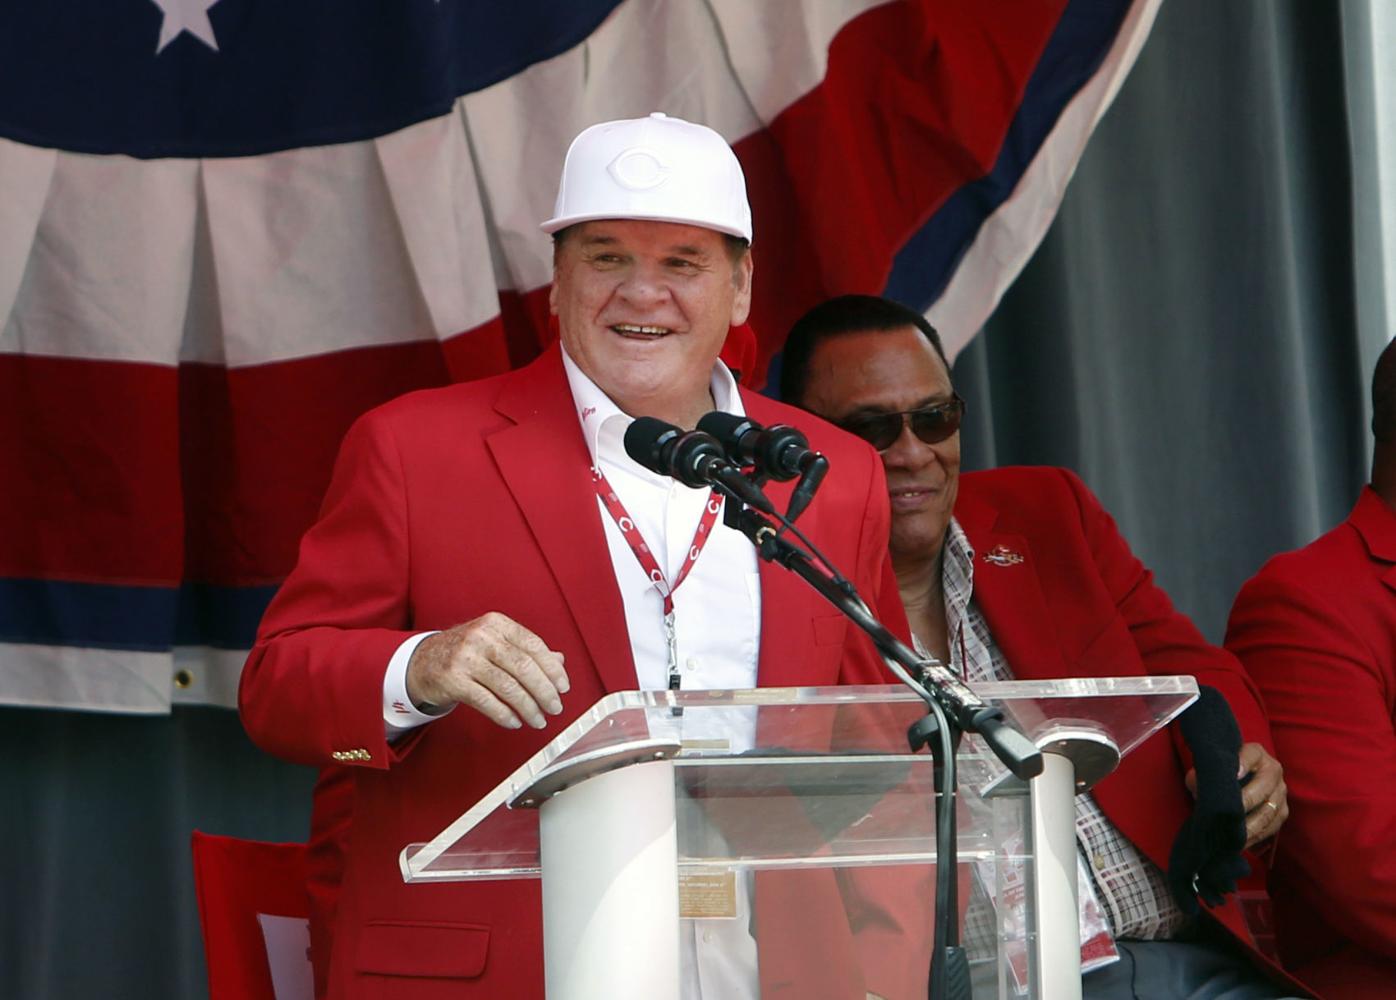 Pete Rose accused of using corked bats by former Expos groundskeeper